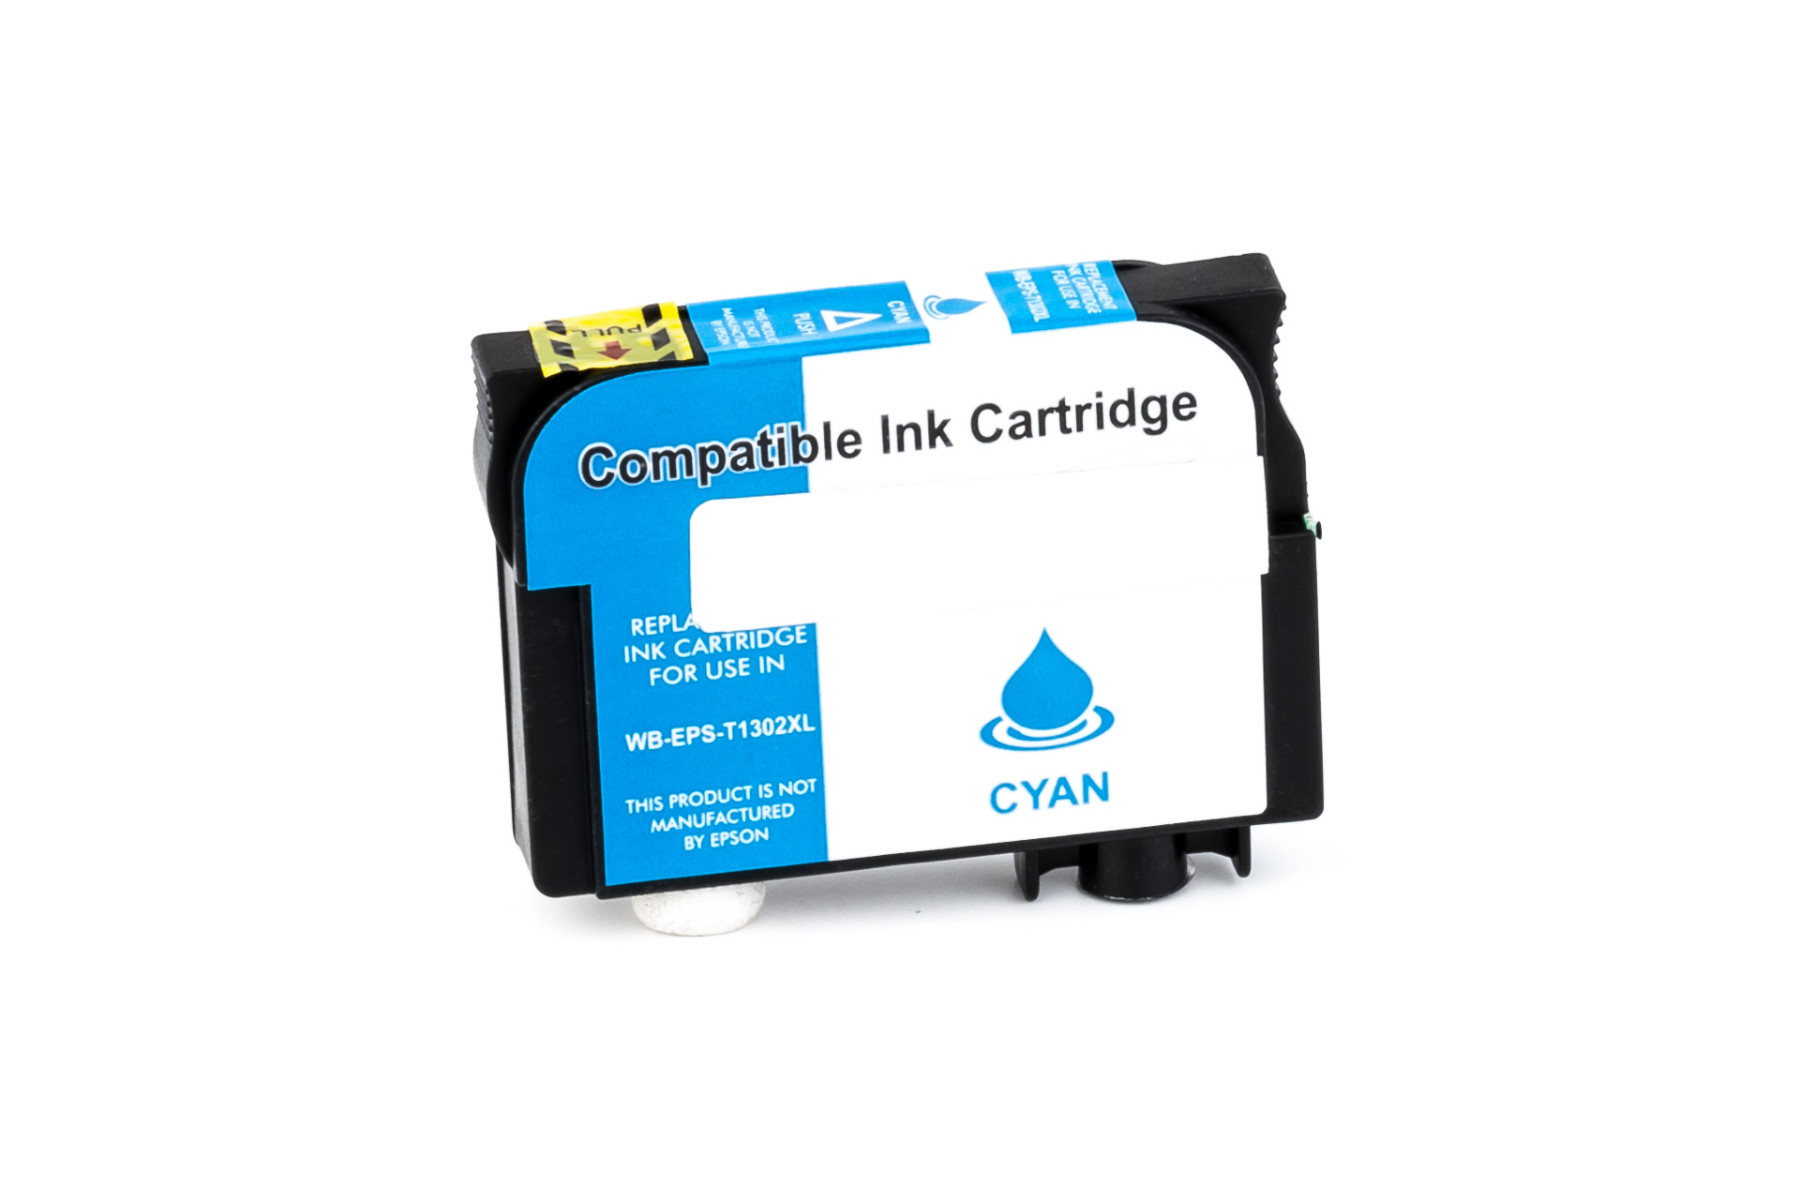 Set consisting of Ink cartridge (alternative) compatible with Epson - T130140 - Stylus Office B 42 WD / BX 525 WD / 535 WD / 625 FWD / 630 FWD / 635 FWD / 925 FWD / 935 FWD / Stylus SX 525 WD / 535 WD / 620 FW ff. black, T130240 - Stylus Office B 42 WD / 